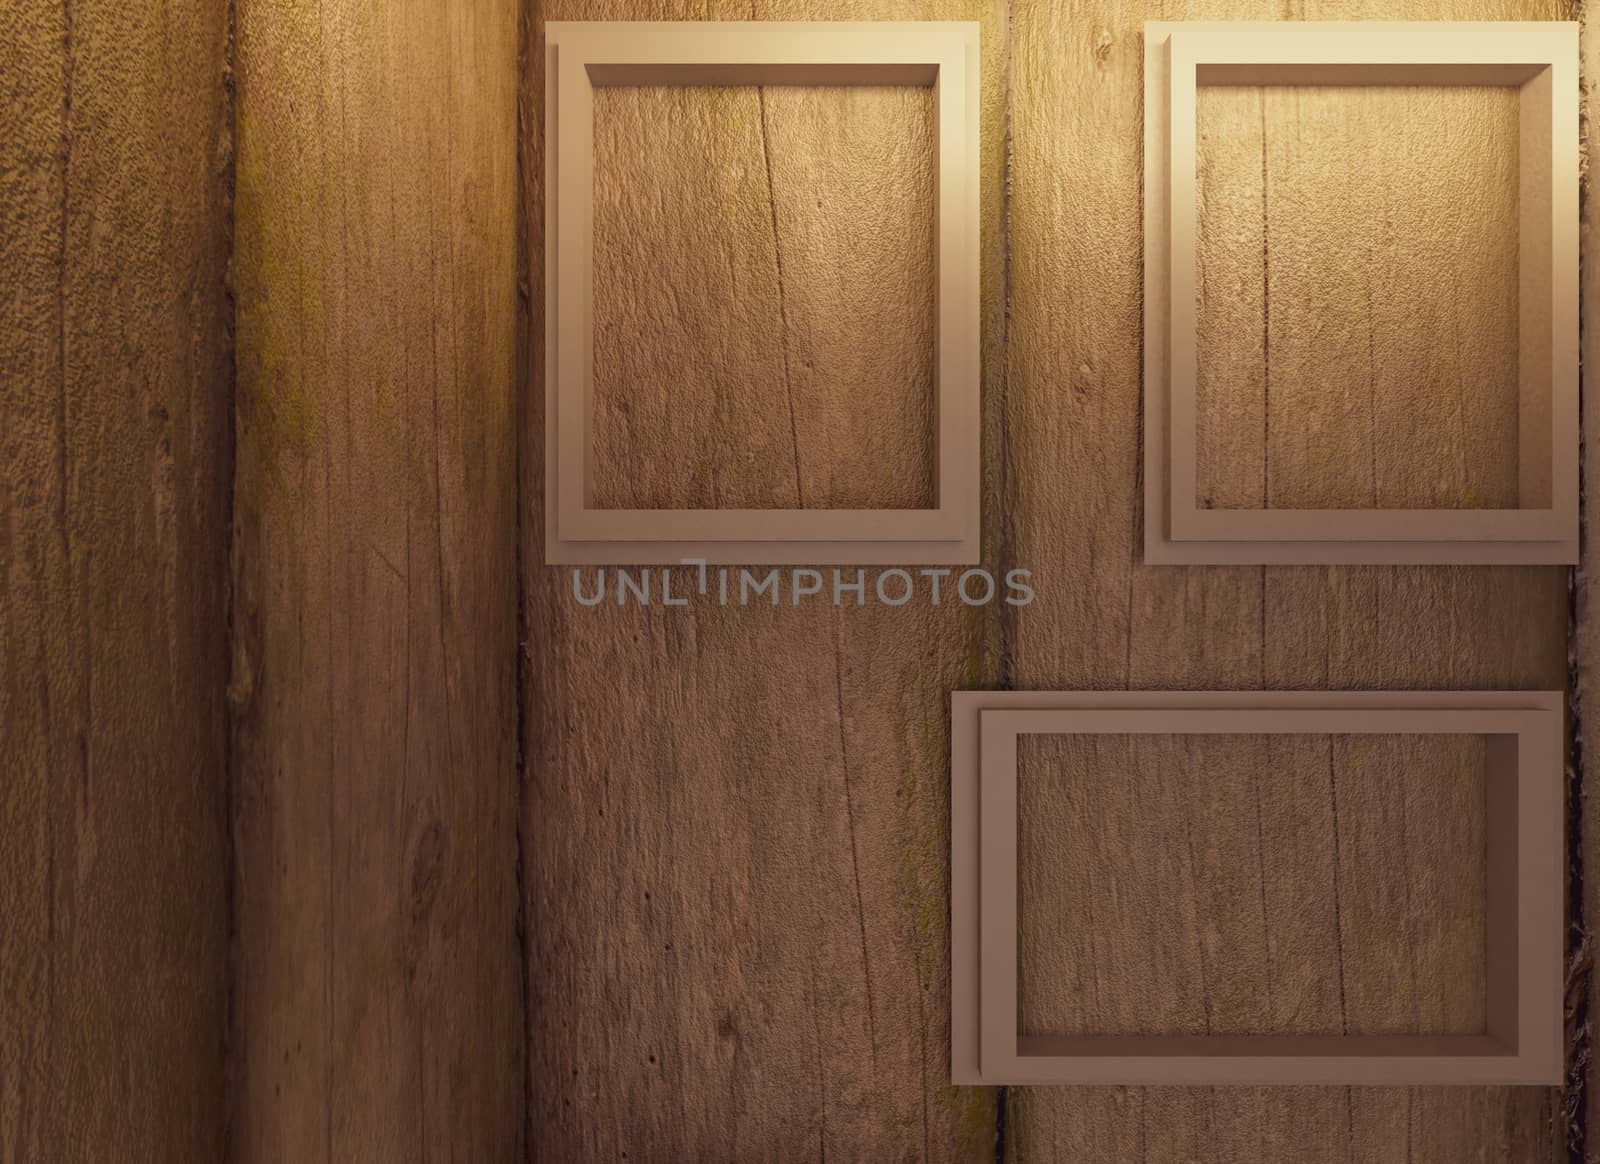 small room 3d render design with wooden wall and warm light by pickaalo